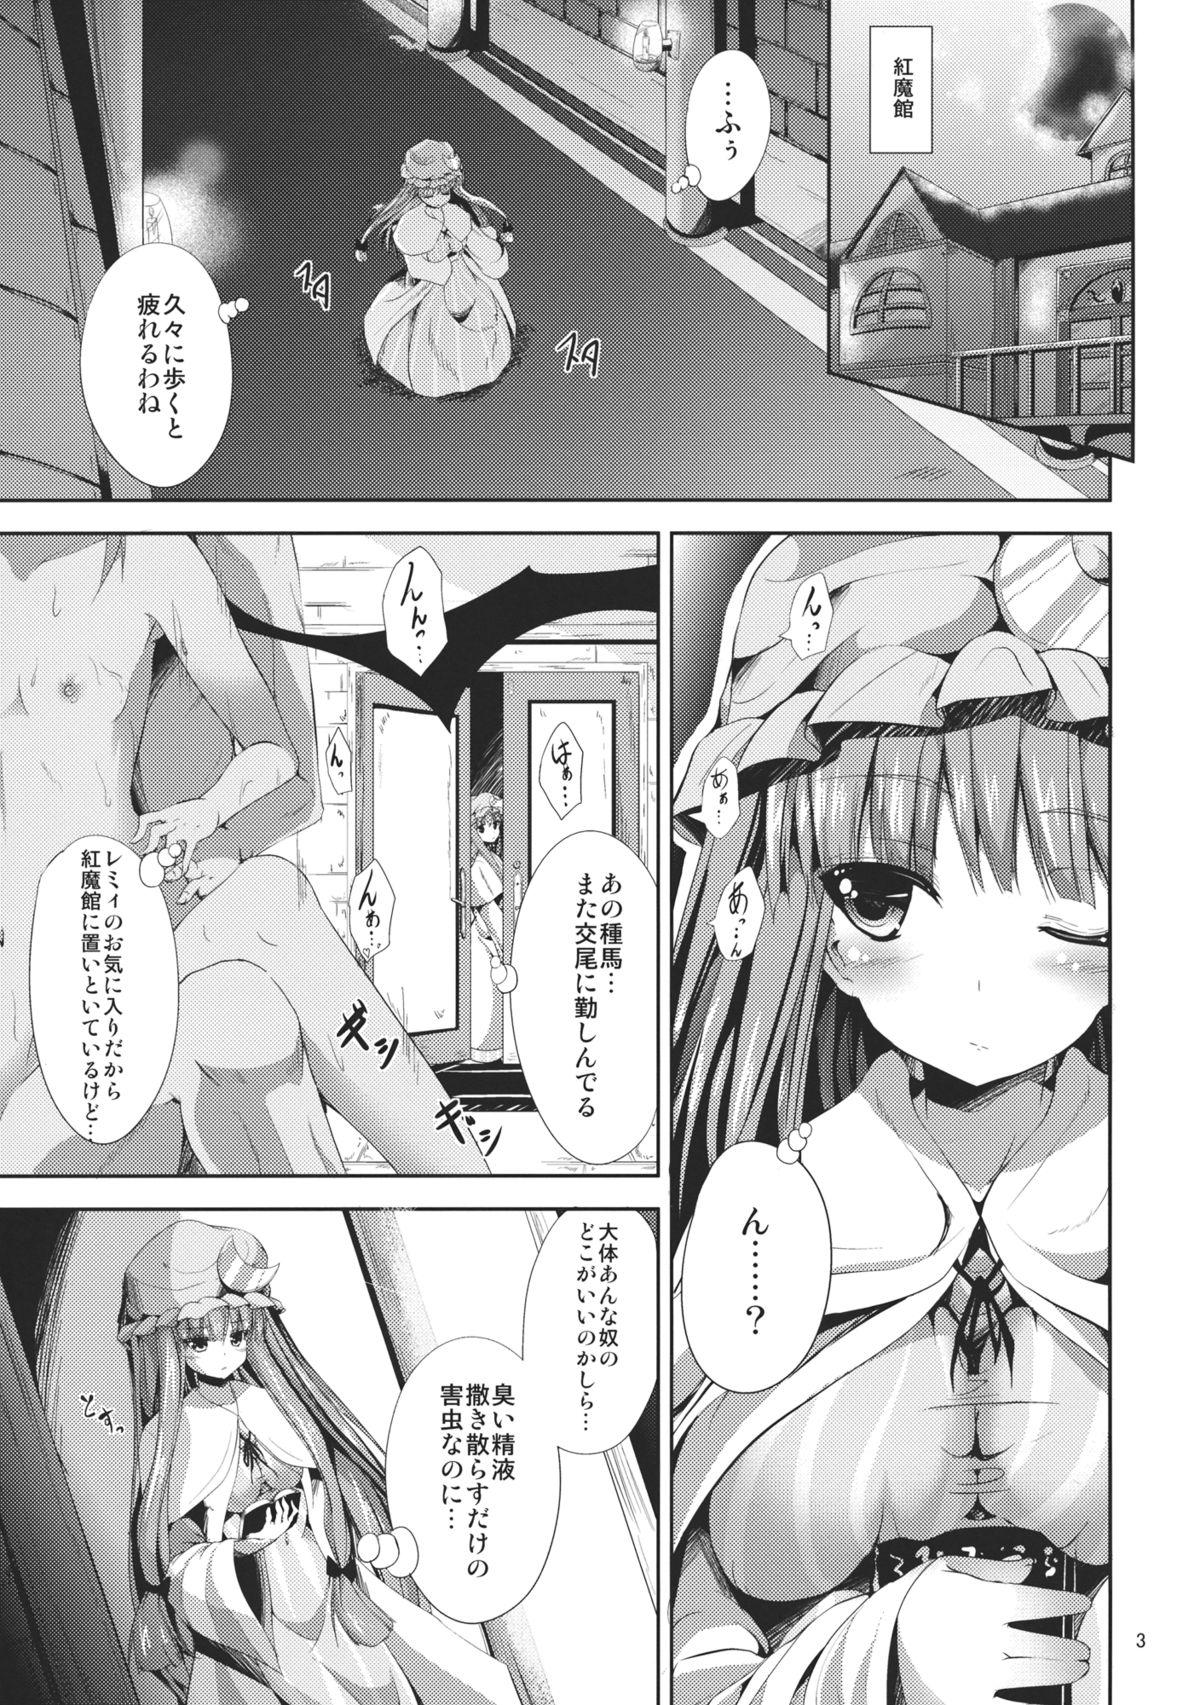 Big Dildo Sweet nothingS - Touhou project Porn - Page 3